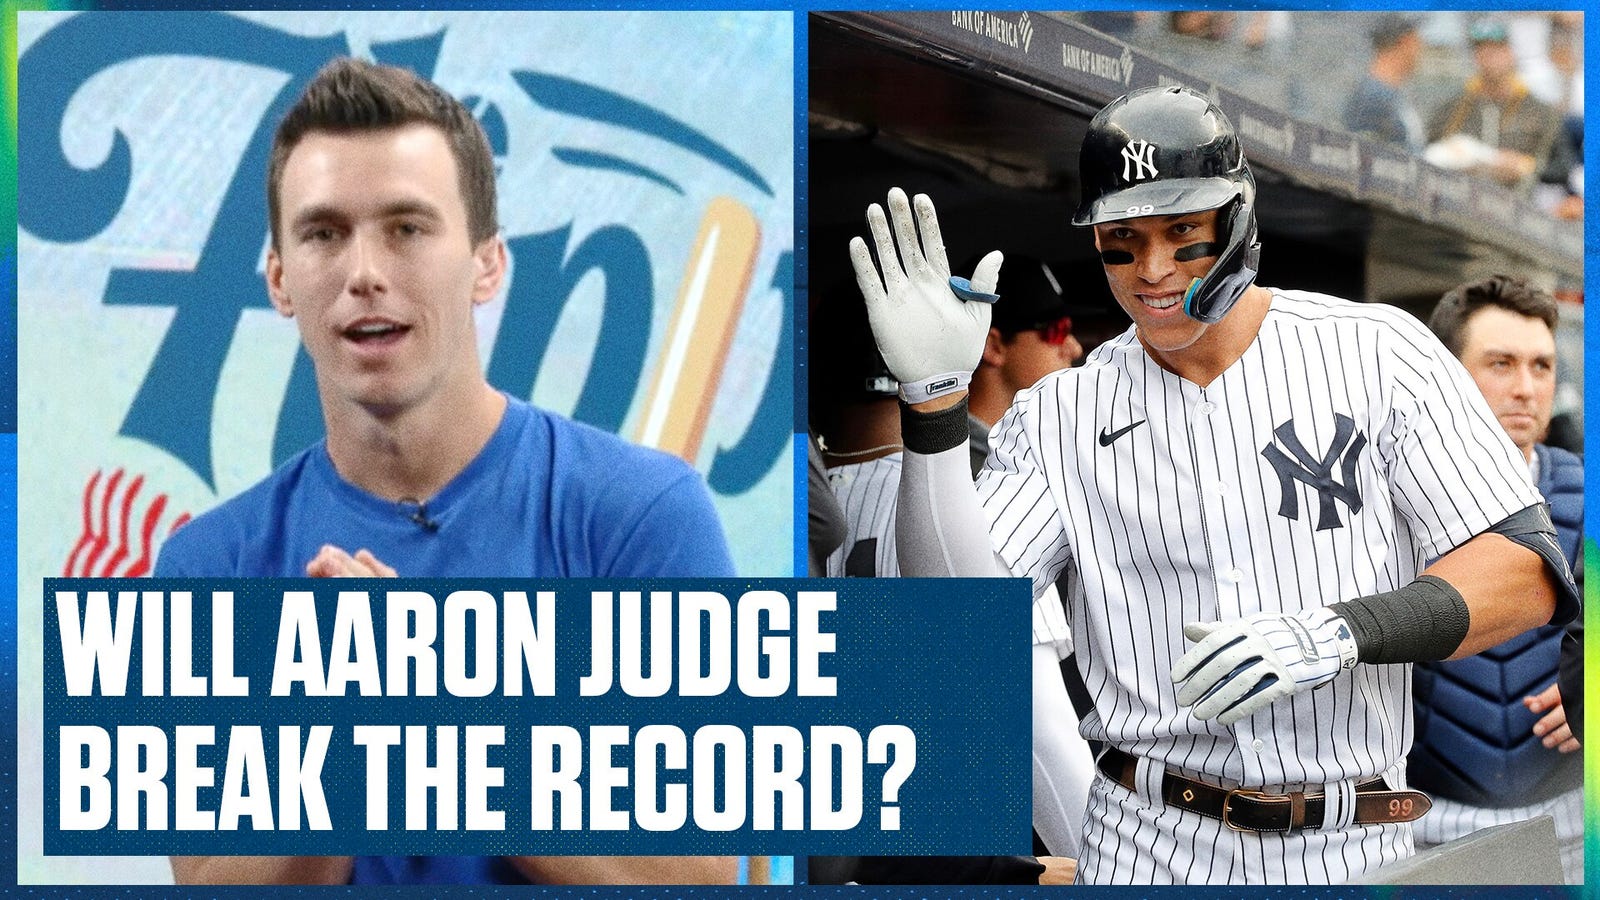 Aaron Judge chases HR record for one season at Yankees